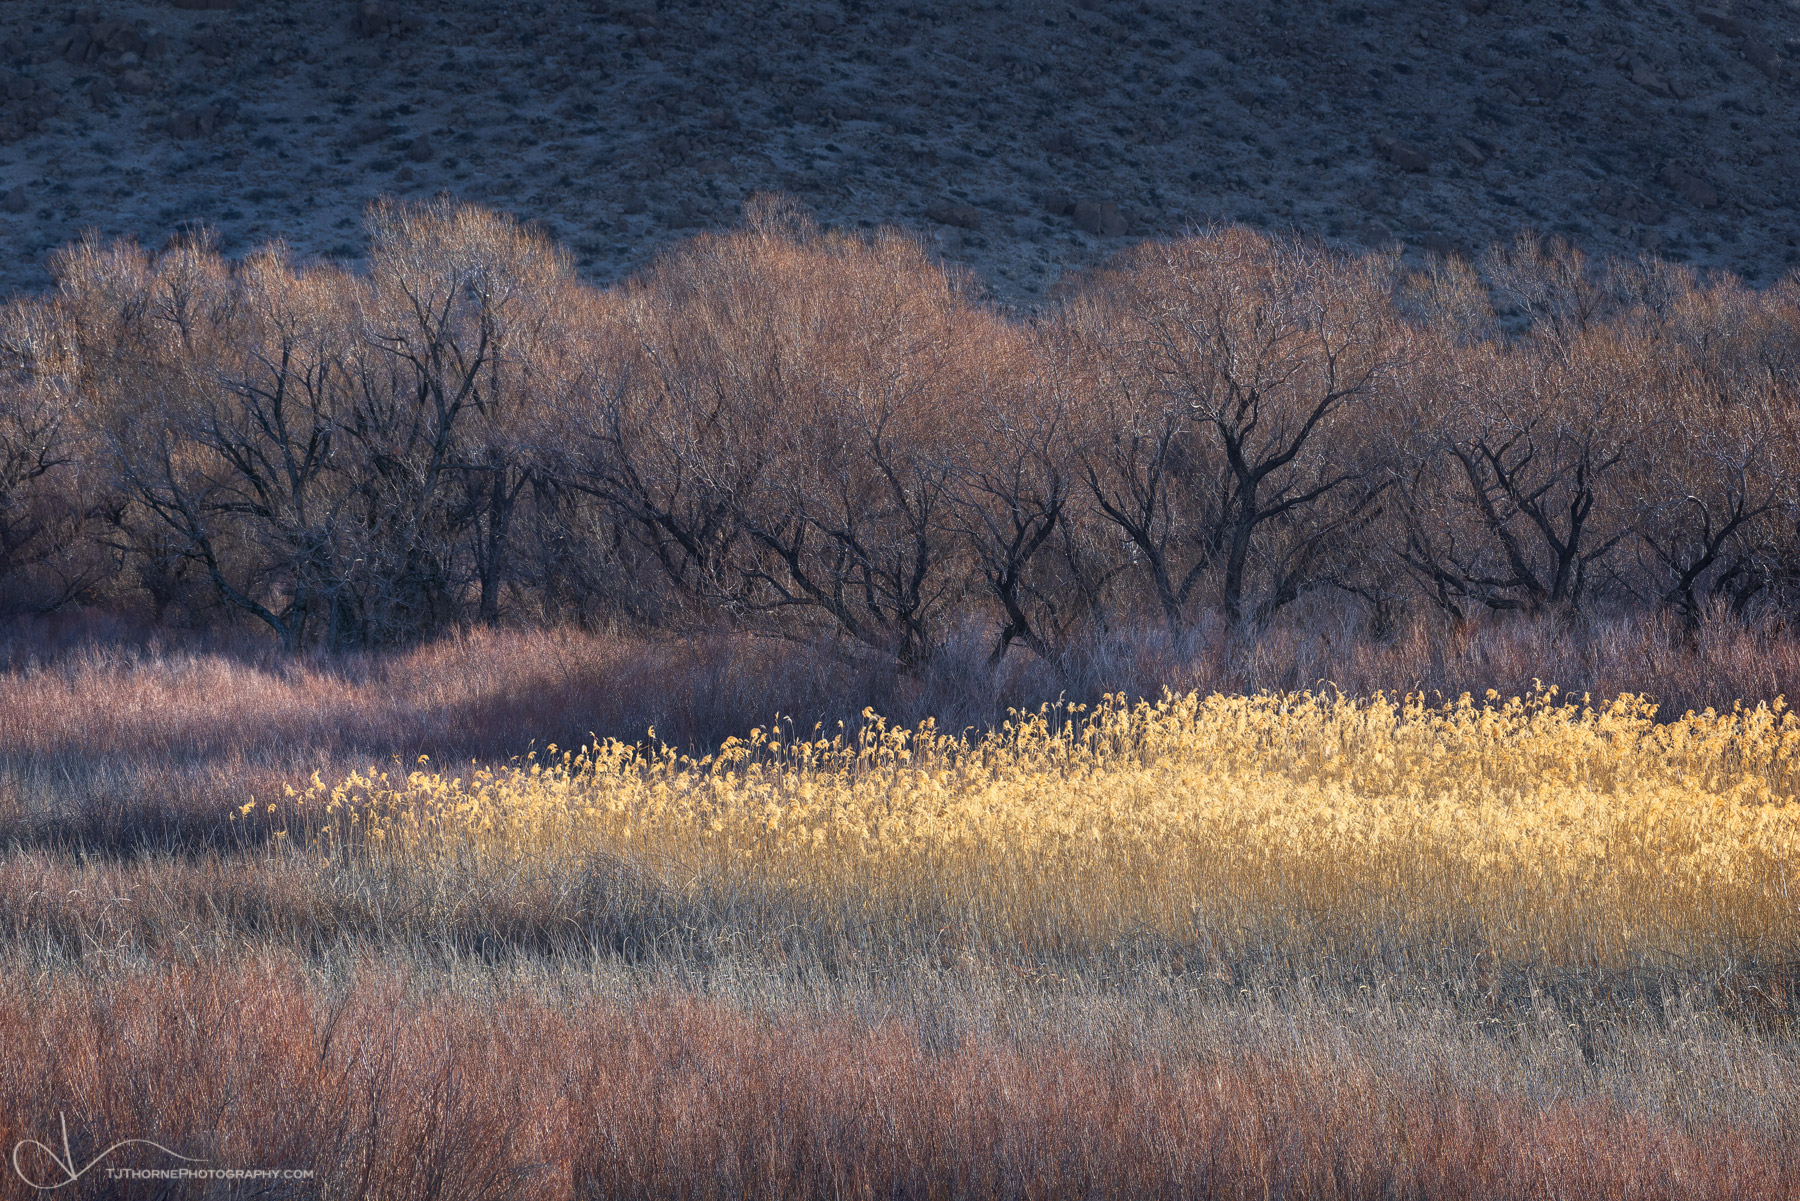 A tapestry of high desert foliage in its winter dress is illuminated by the early morning light in the Eastern Sierra region...